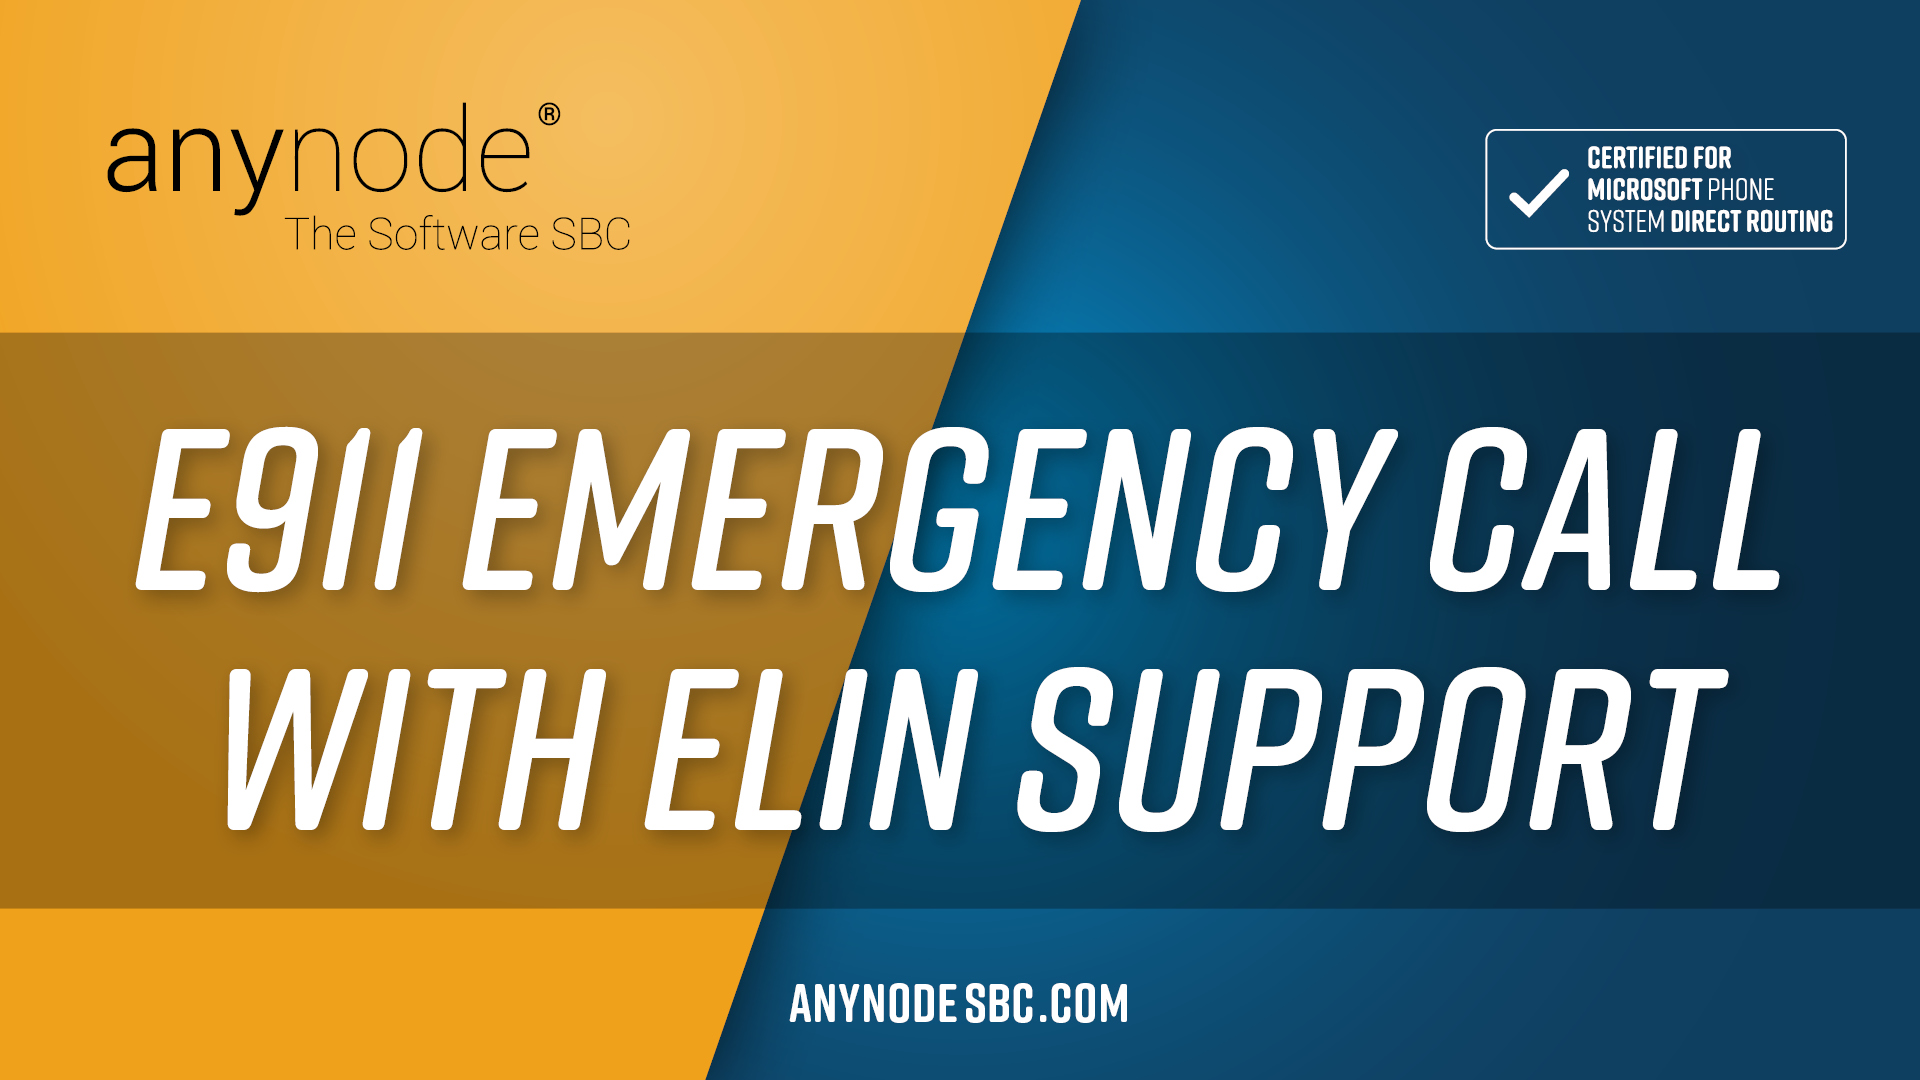 Release_4_6_E911 Emergency Call with ELIN Support